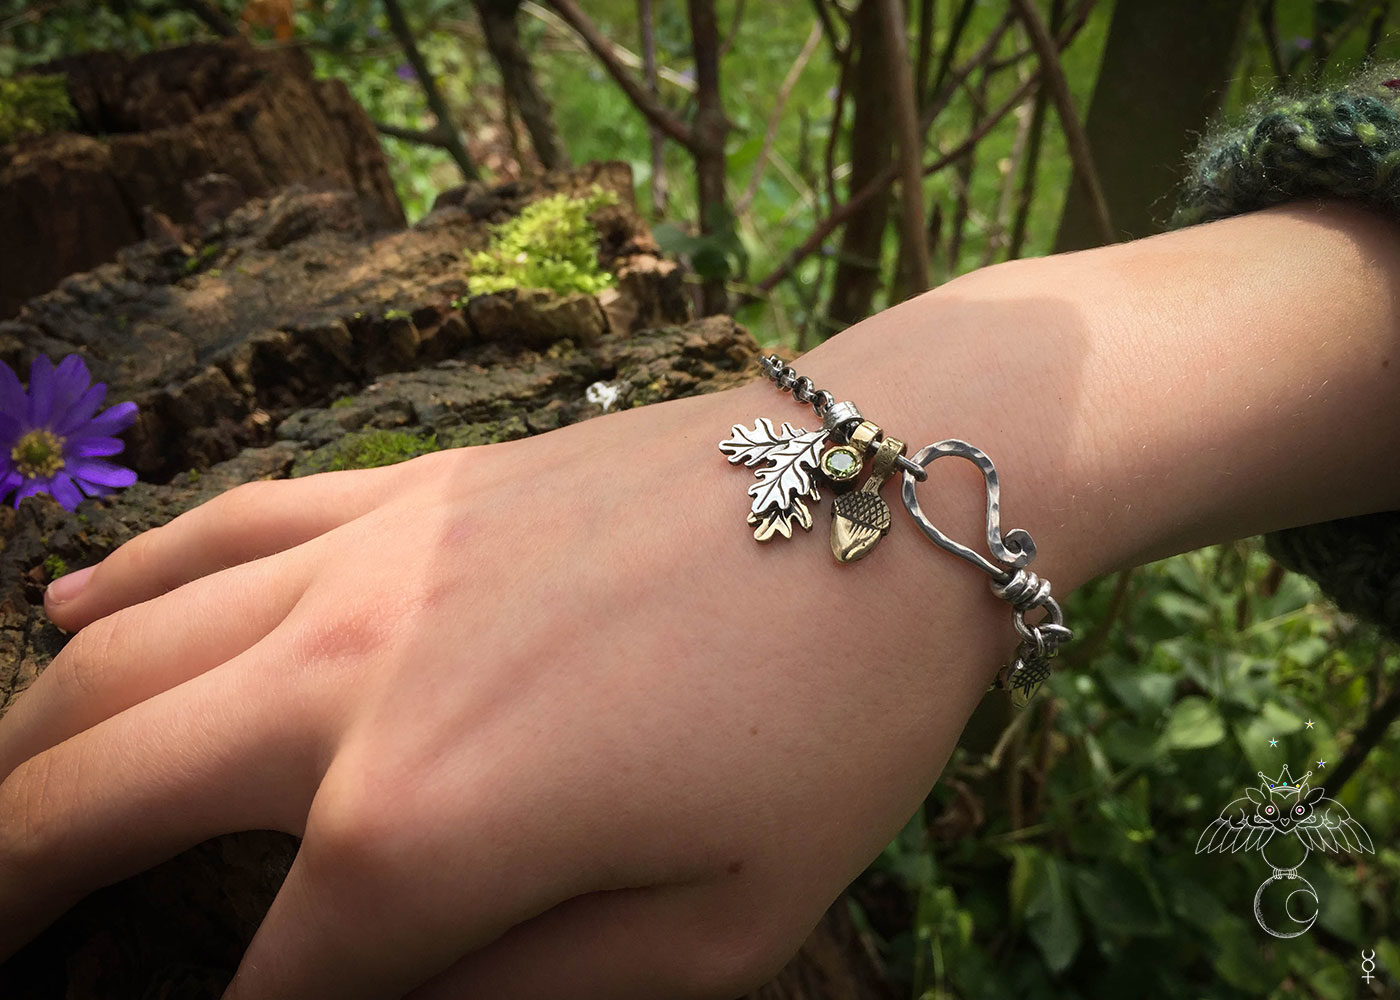 Silver charm bracelet handcrafted and recycled for the tree of life sculpture collection